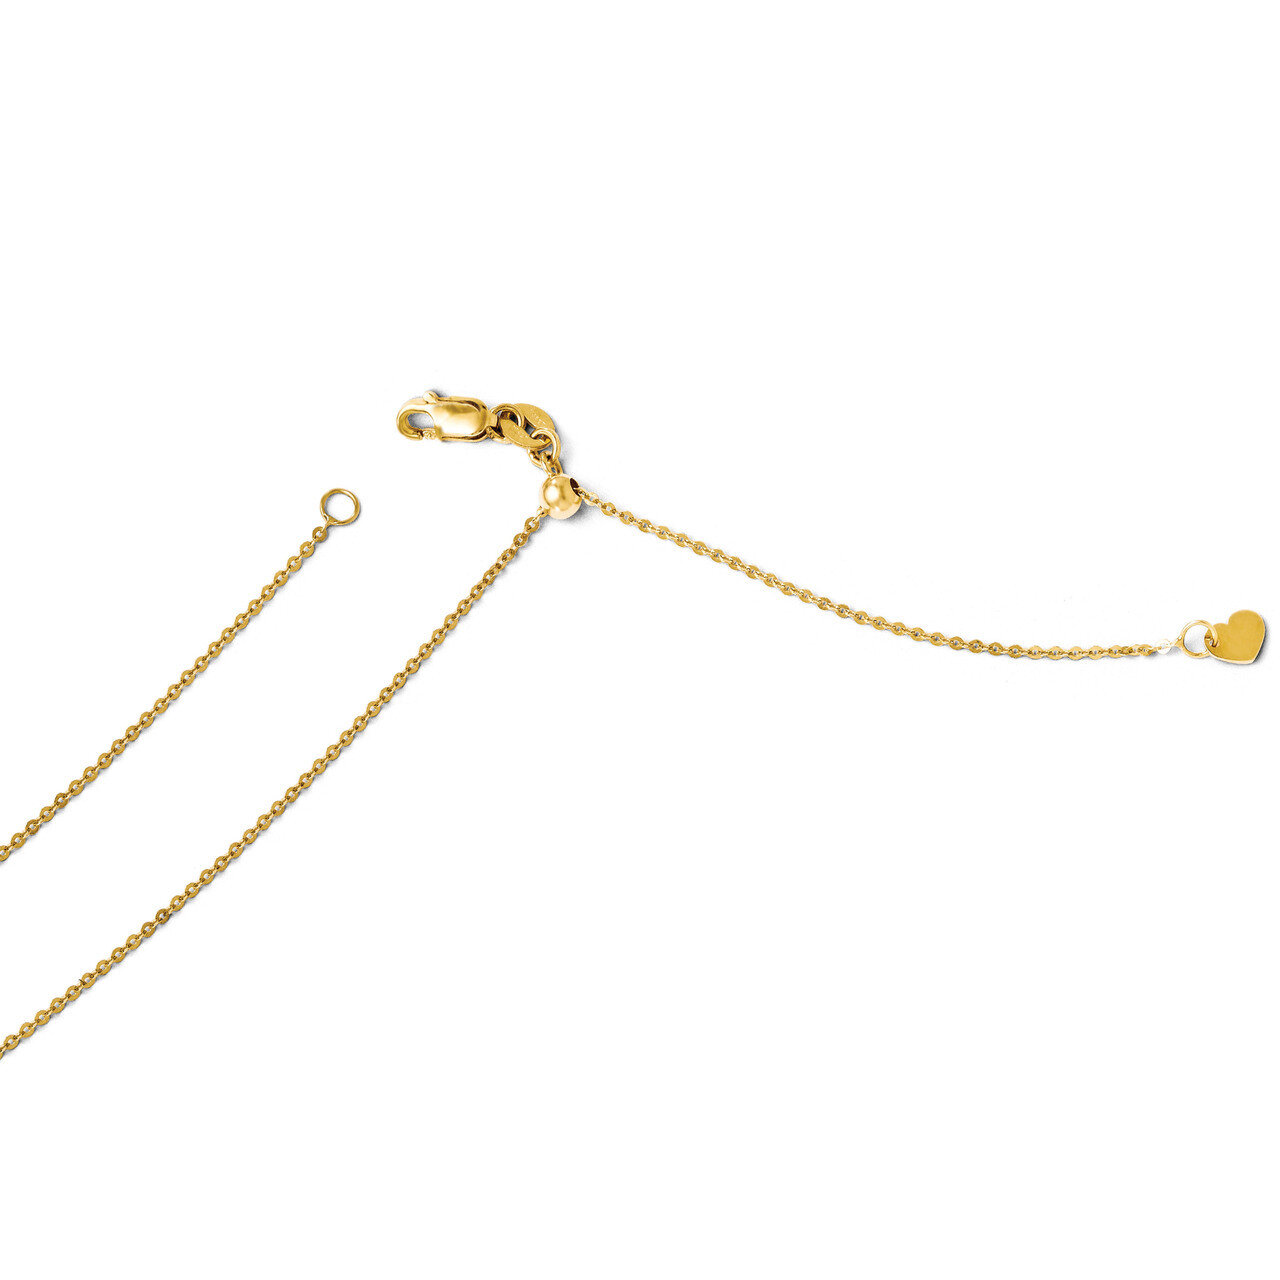 Adjustable Flat Cable Chain 22 Inch - 14k Gold HB-3217-22